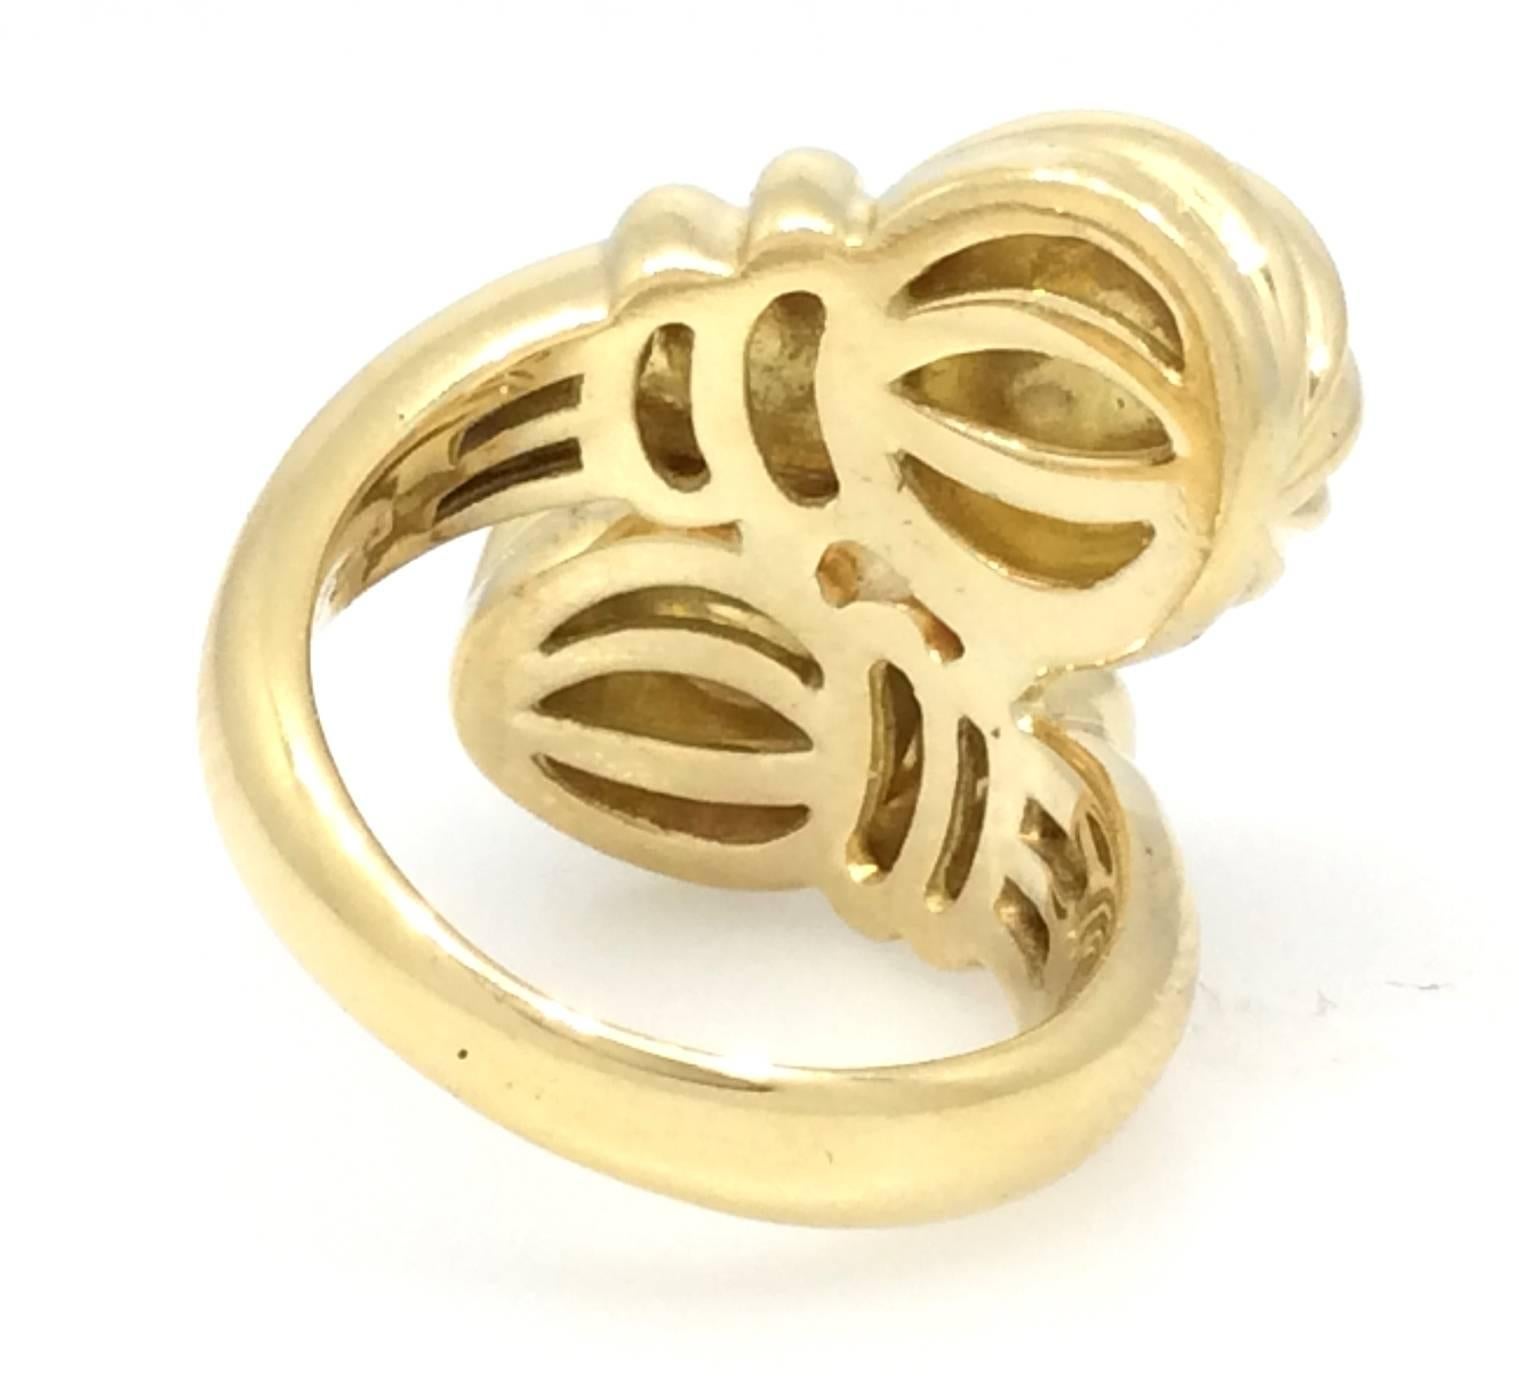 Boucheron Gold Double Finial Wrap Ring in 18k Yellow Gold In Excellent Condition For Sale In La Jolla, CA